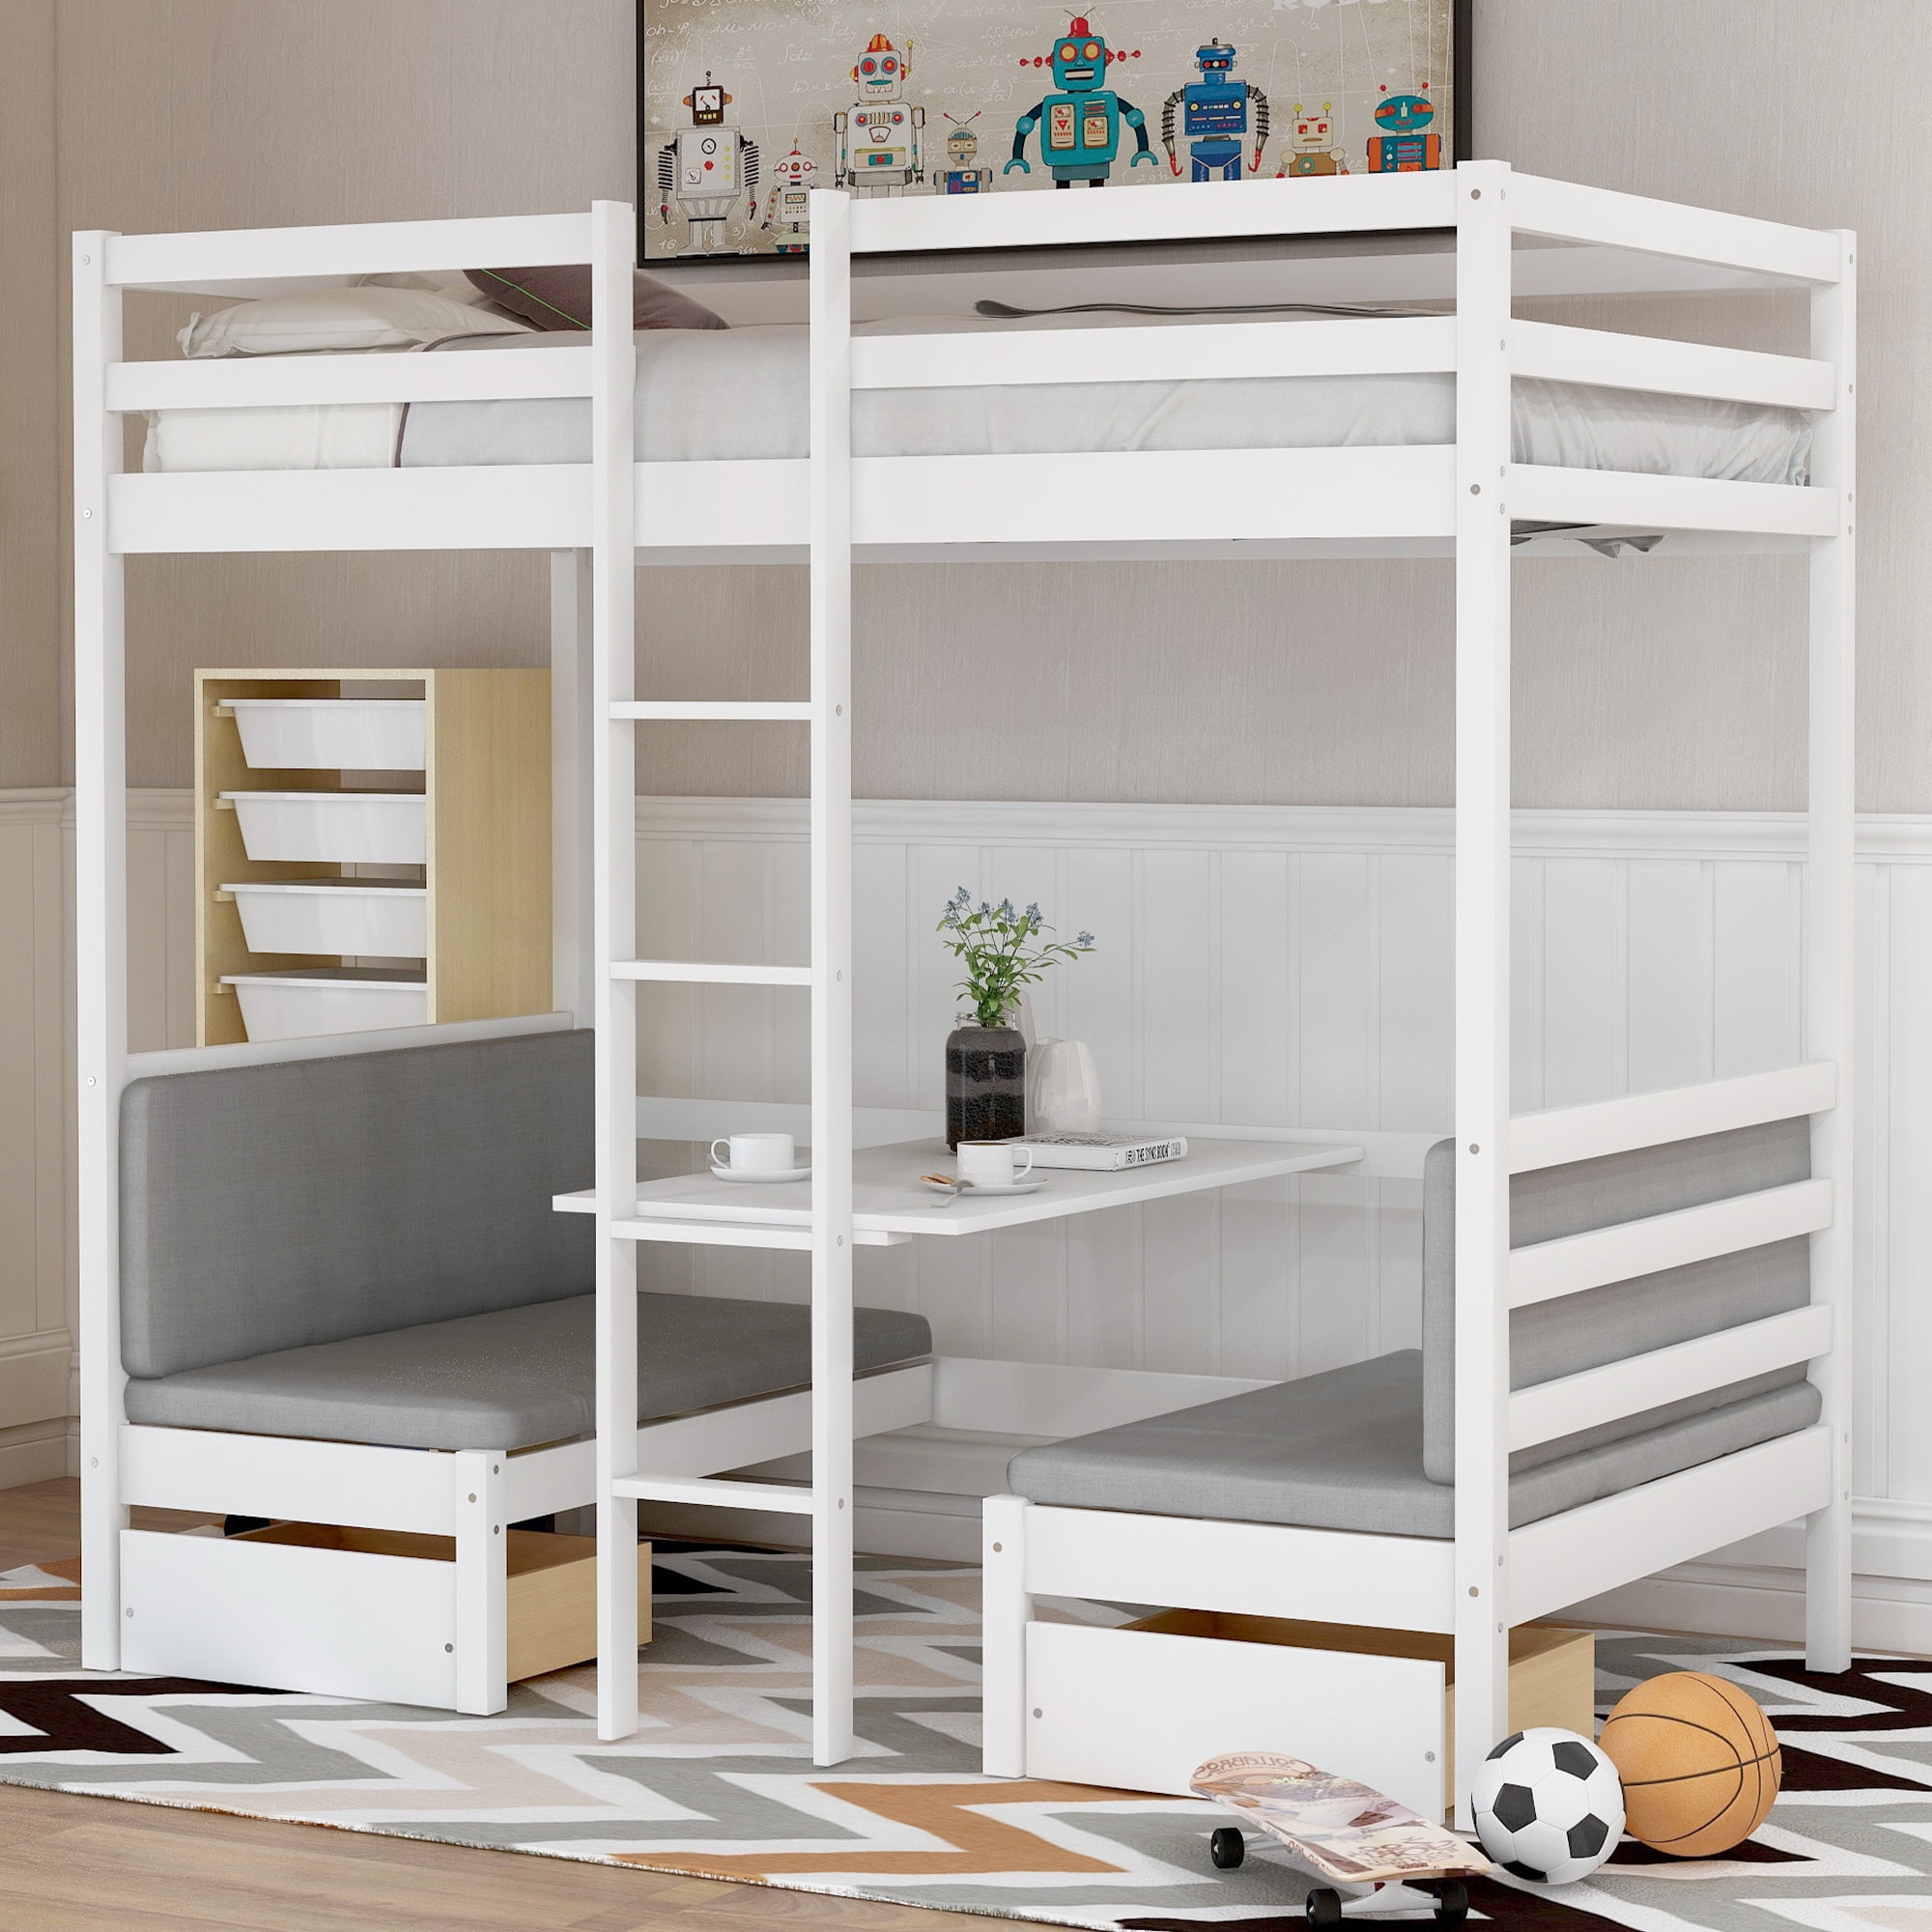 Euroco Solid Wood Convertible Twin Bunk, Solid Wood Bunk Bed With Futon